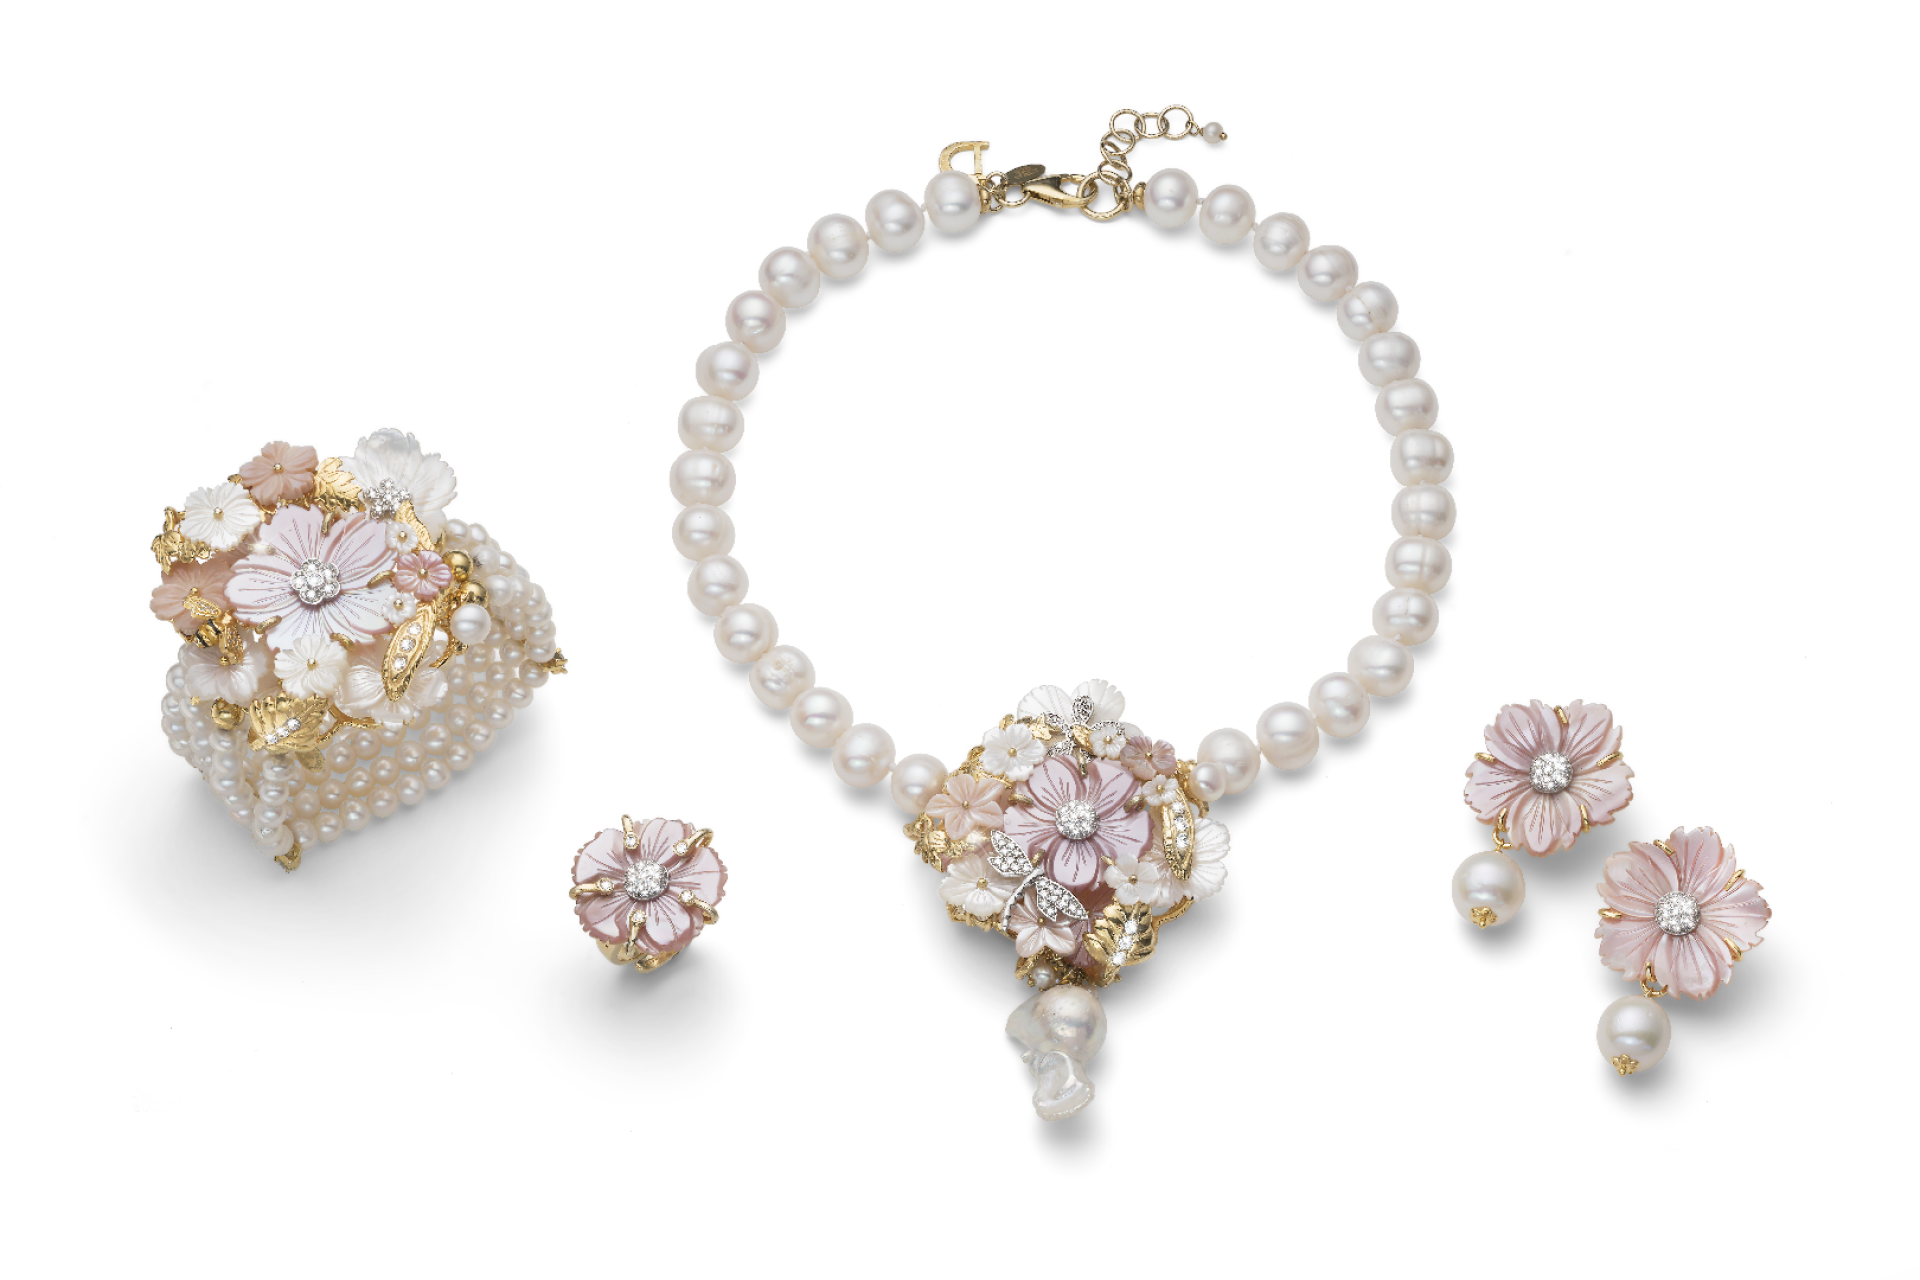 set of jewels with white pearls, pink flowers, precious stones and golden details